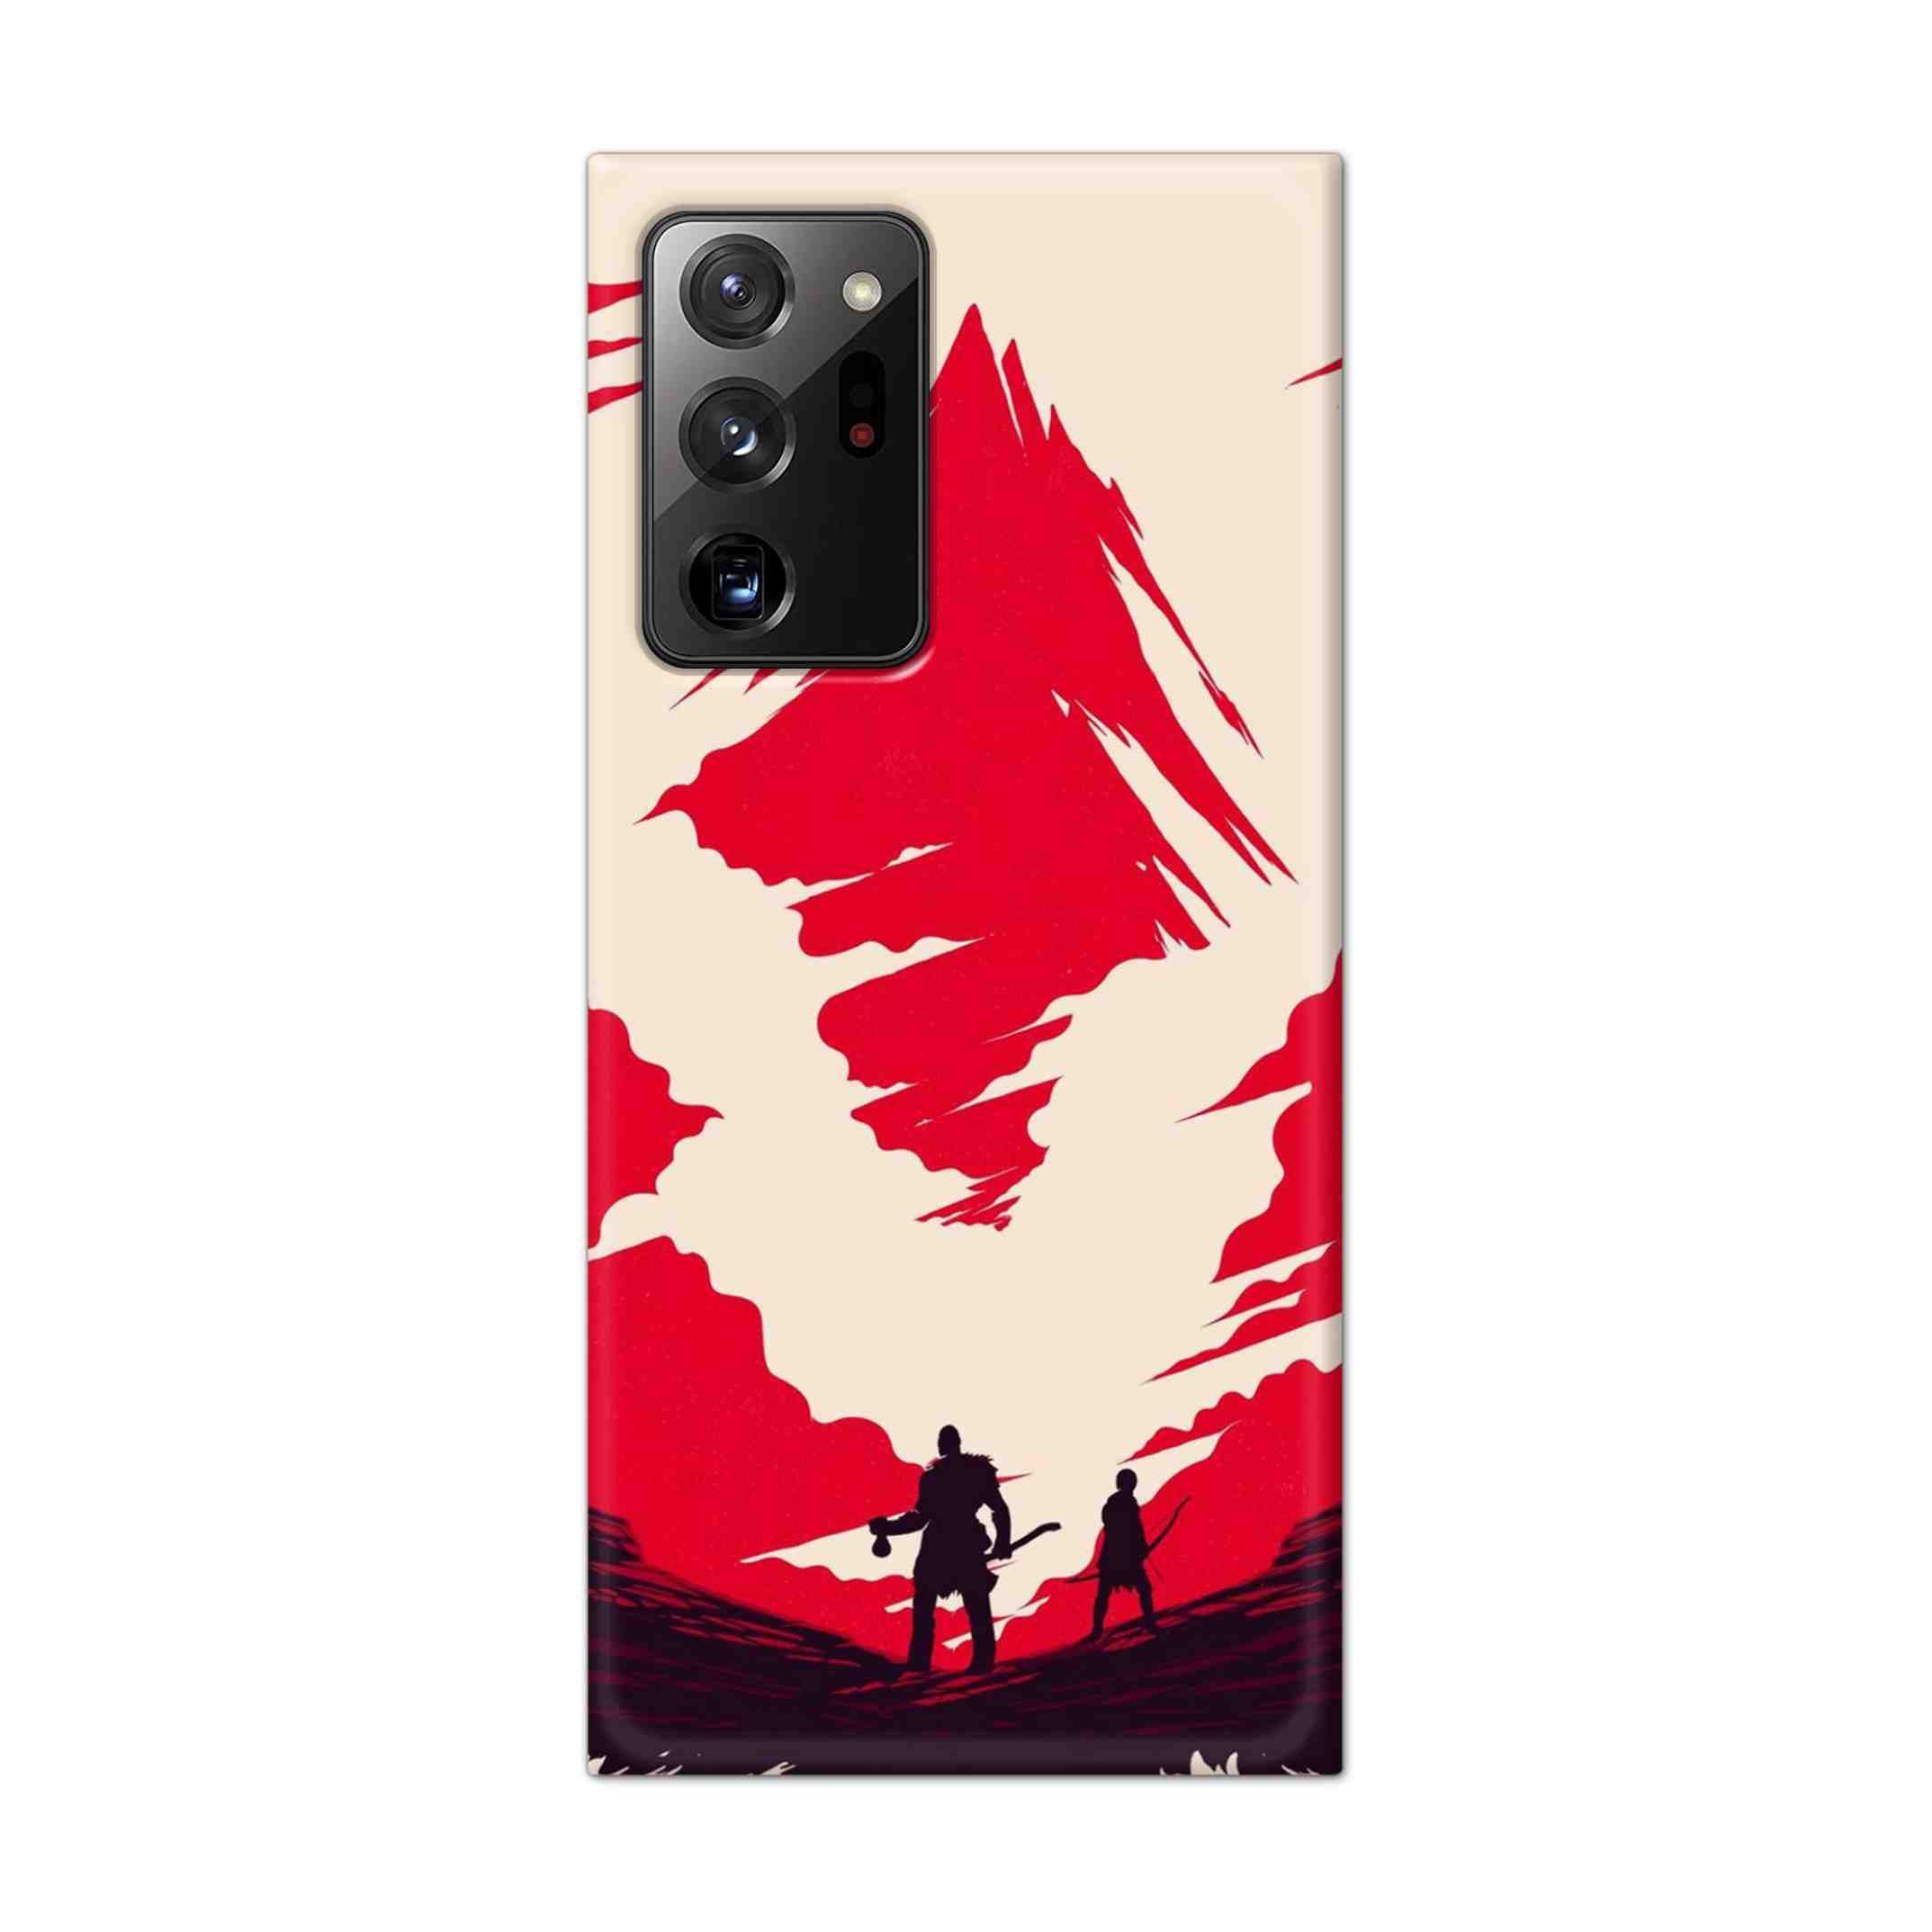 Buy God Of War Art Hard Back Mobile Phone Case Cover For Samsung Galaxy Note 20 Ultra Online